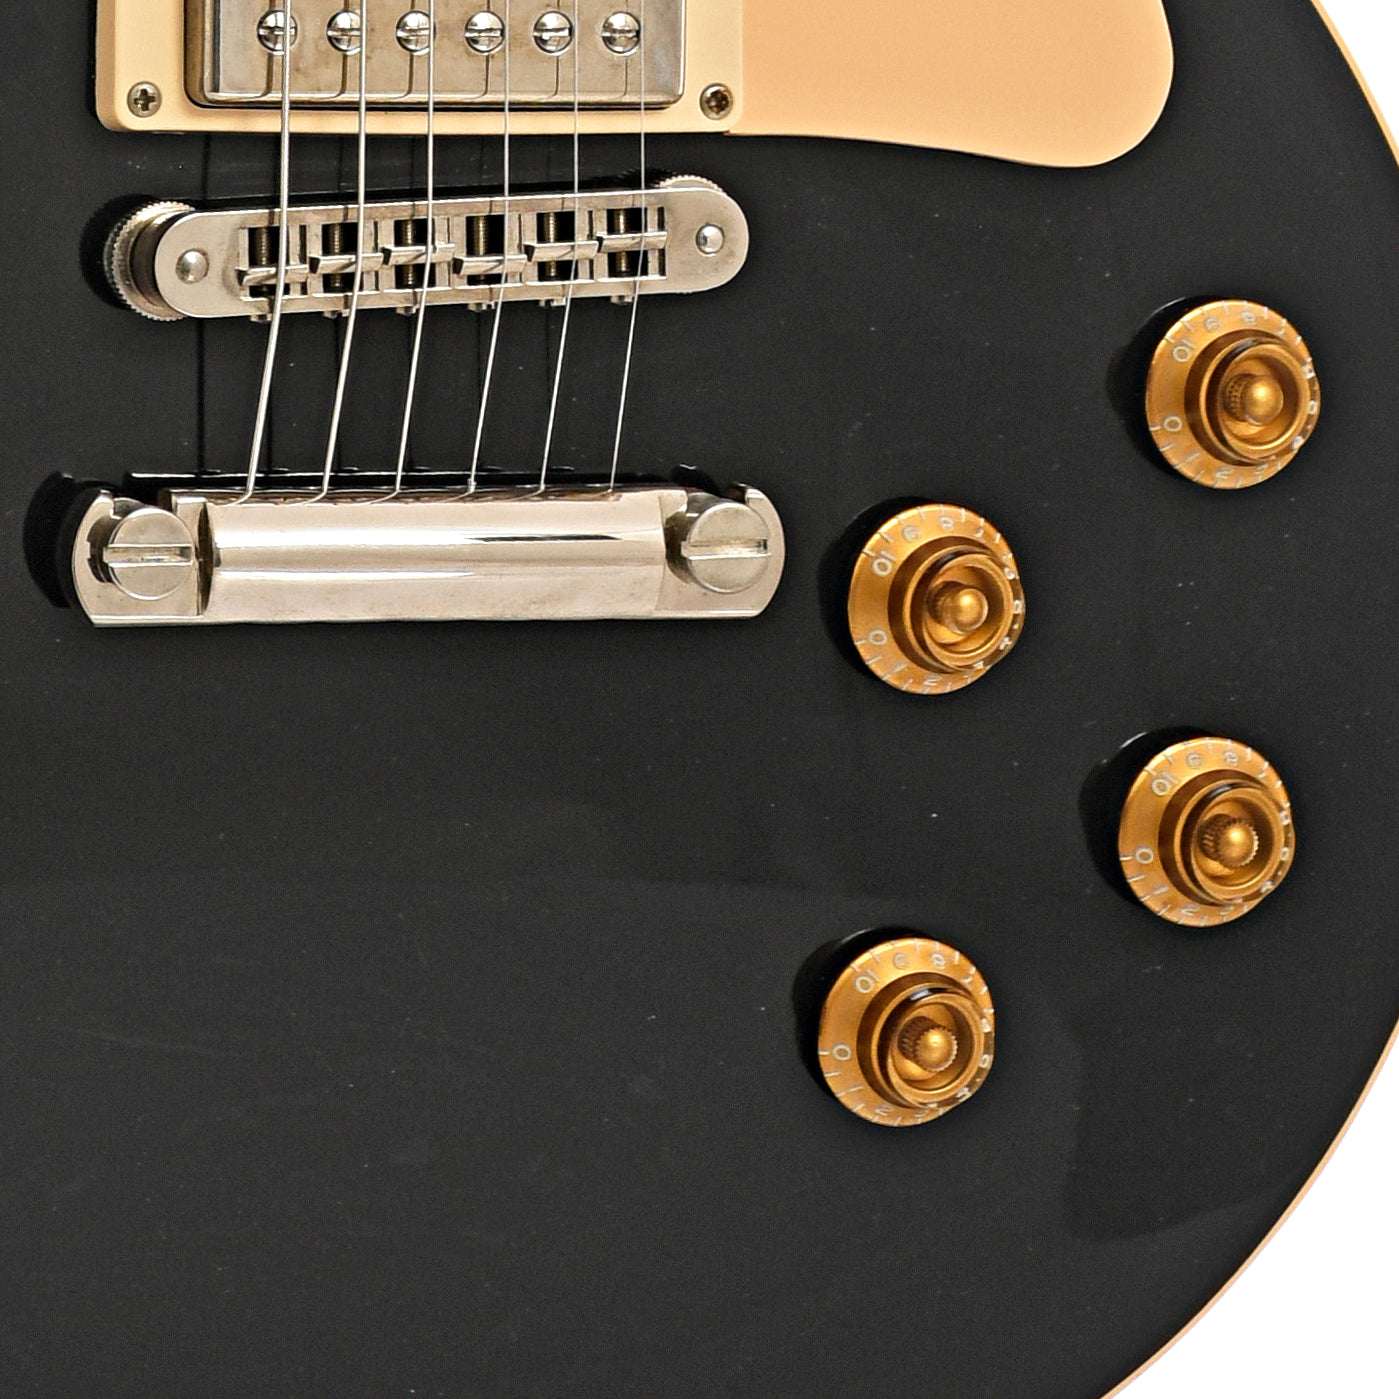 Tailpiece, Bridge and controls of Gibson Les Paul Standard